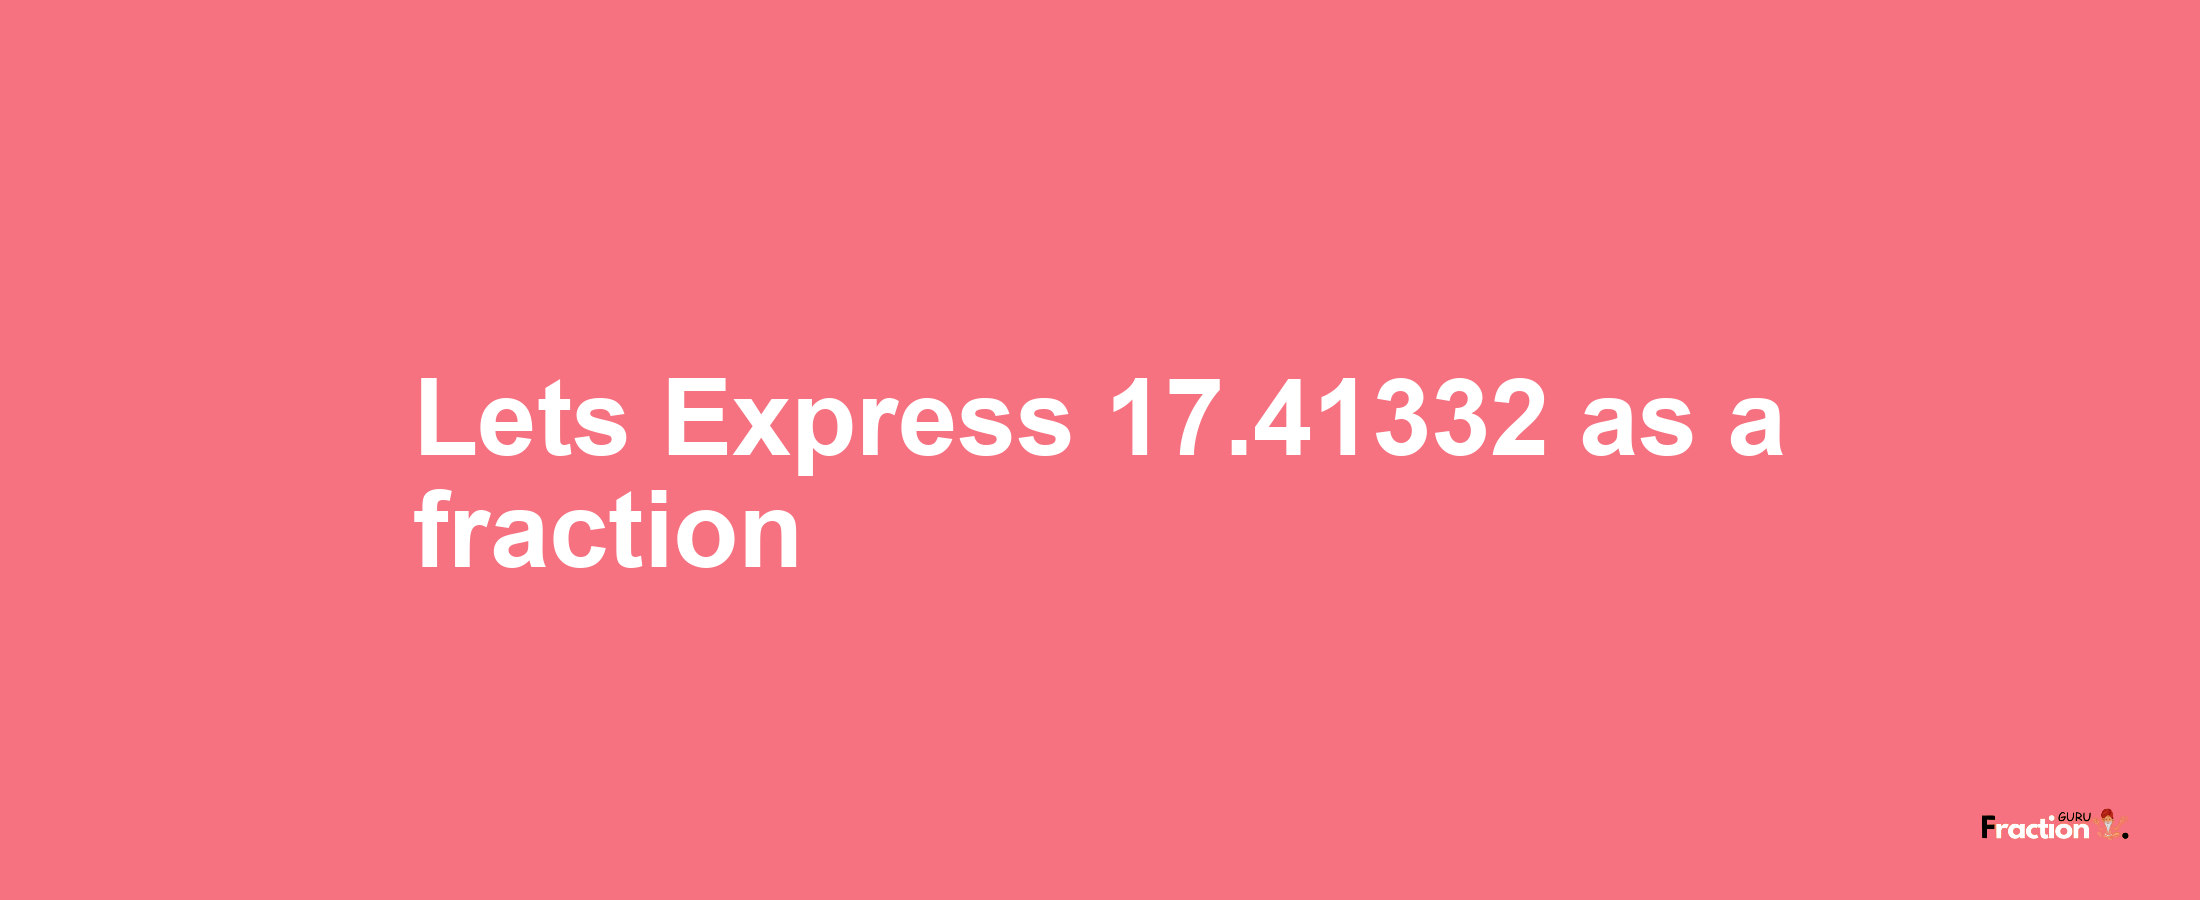 Lets Express 17.41332 as afraction